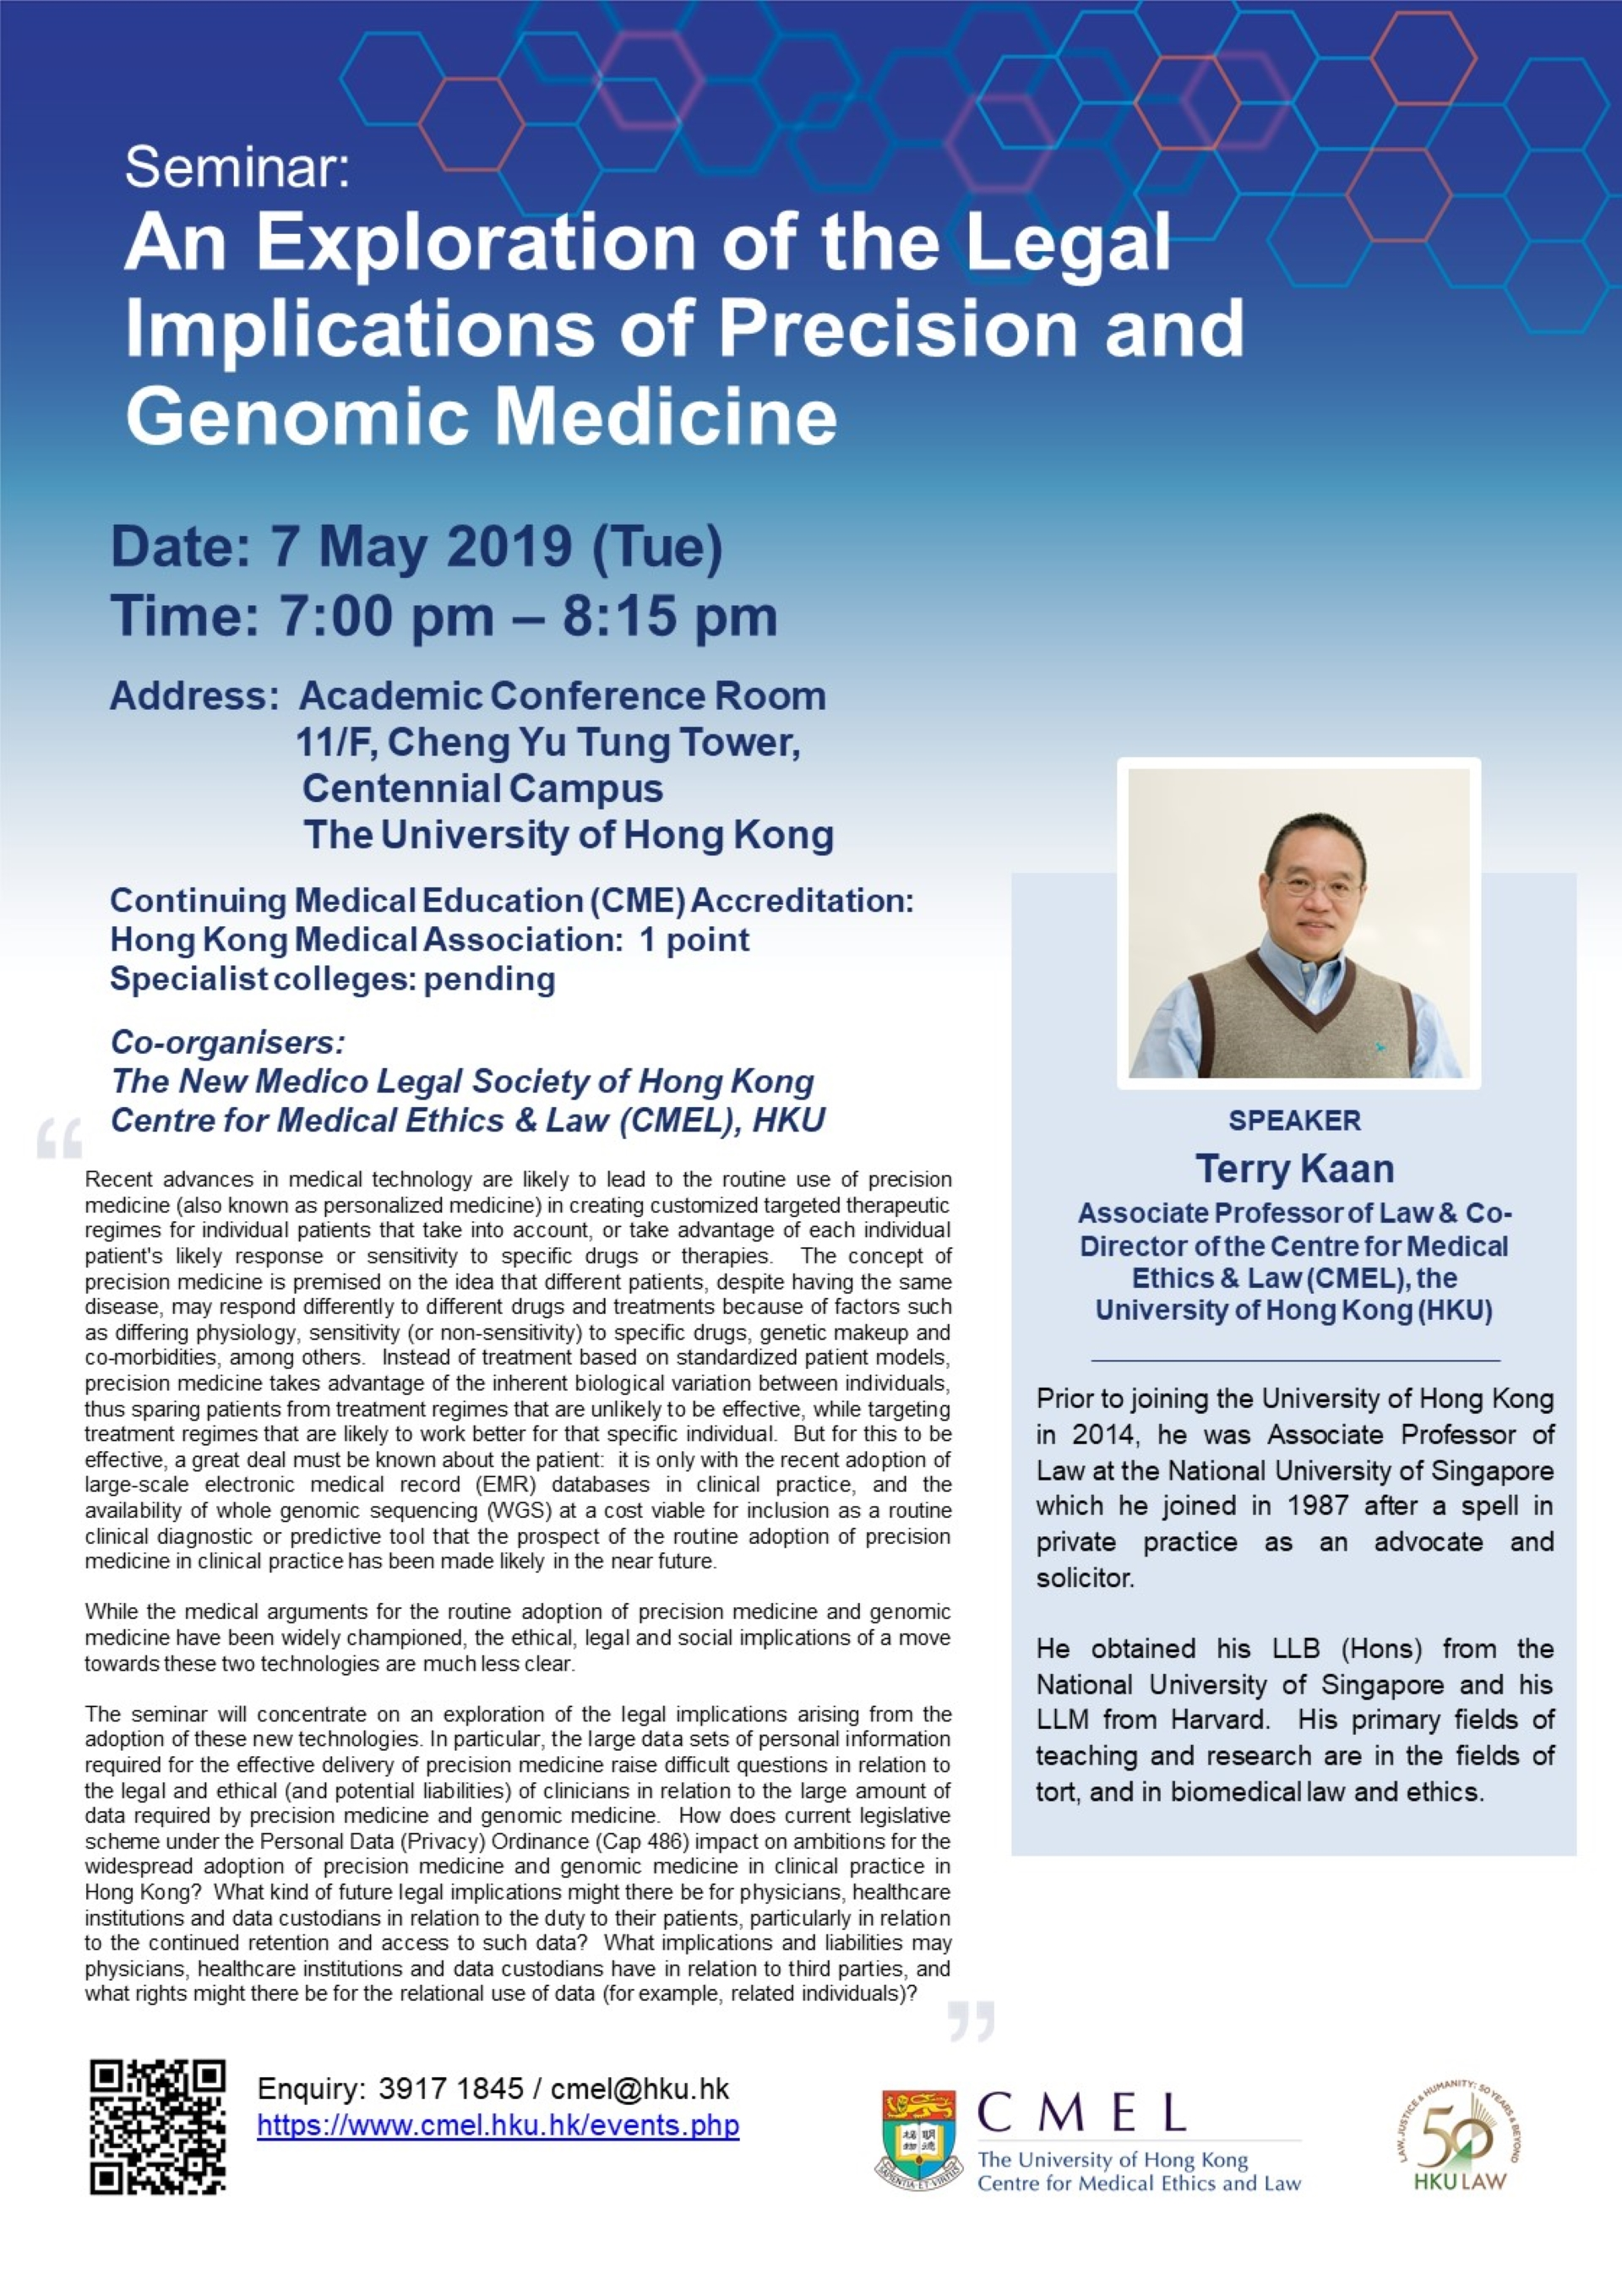 An Exploration of the Legal Implications of Precision and Genomic Medicine